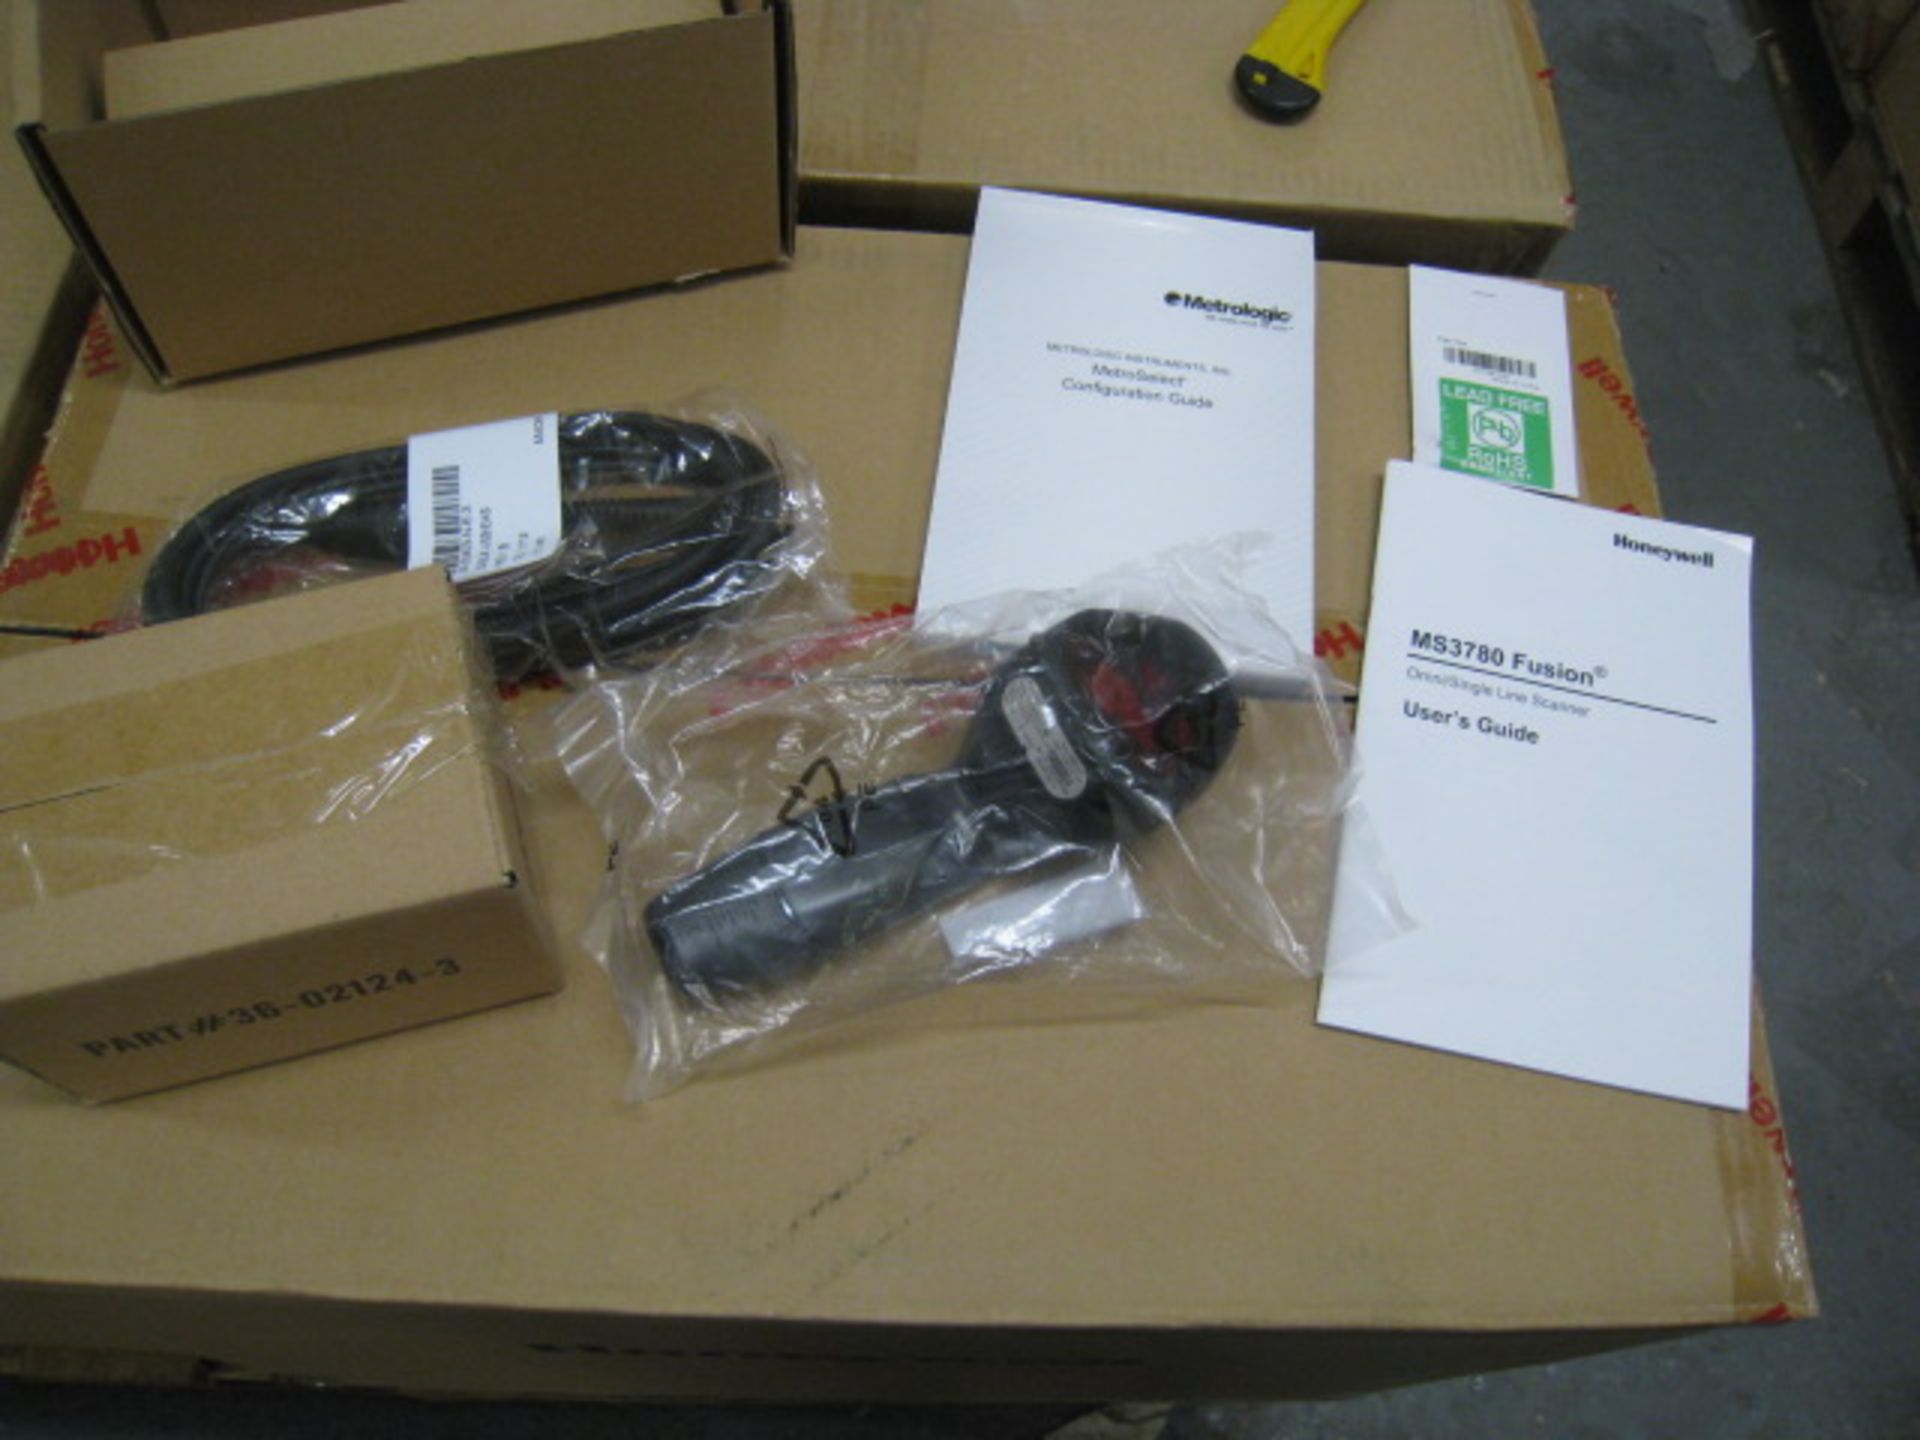 New Honeywell MK3780-61A38/EAS Barcode scanner . More info at: http://www.ebay.co.uk/ - Image 2 of 2